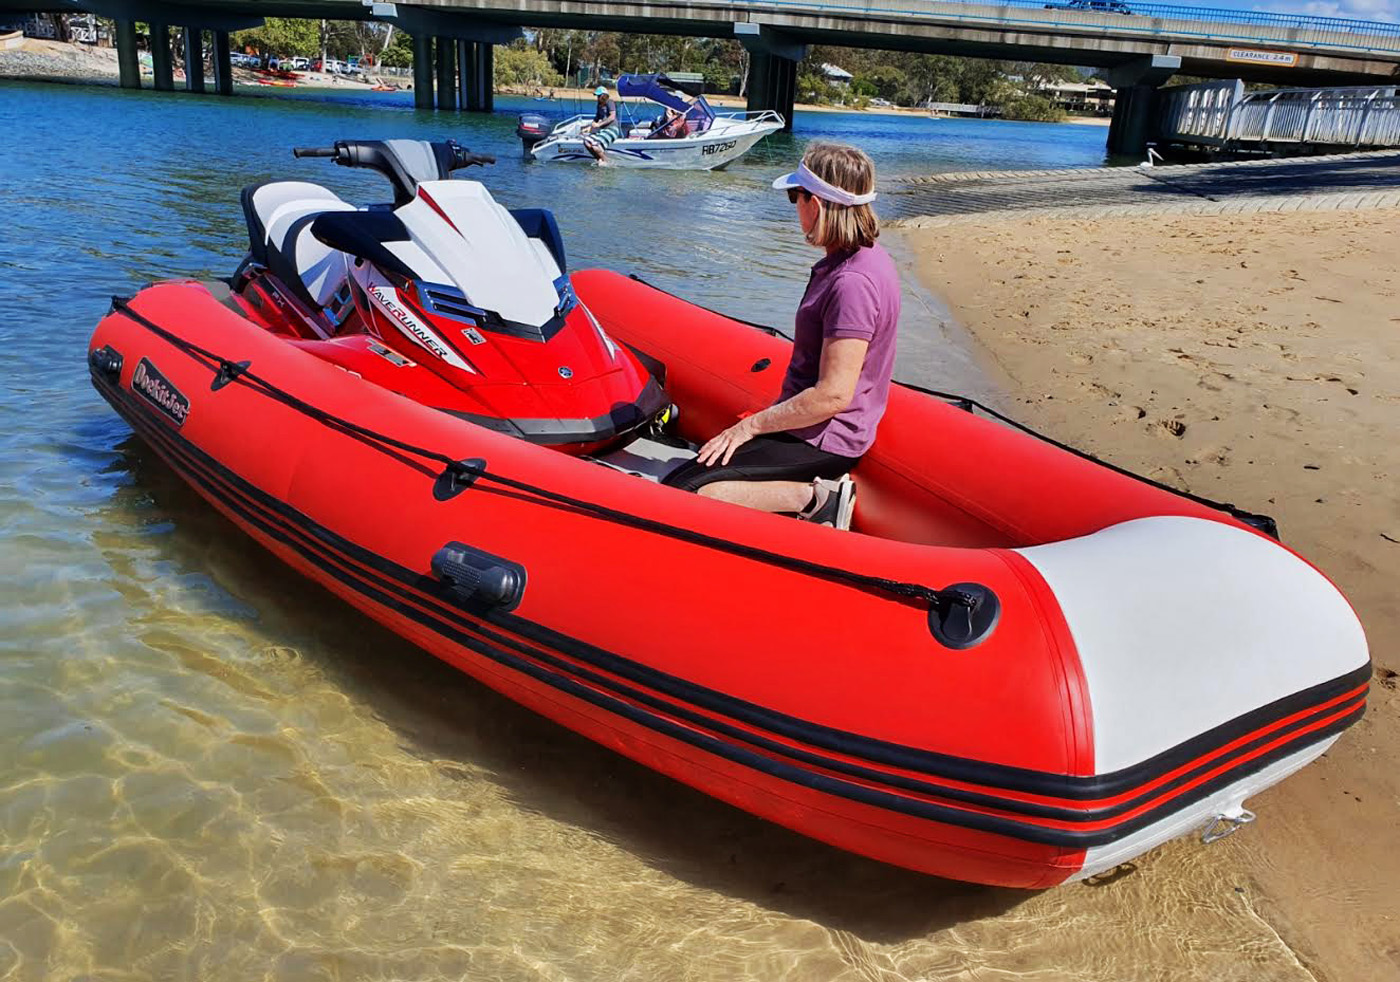 Dockitjet Tender offers jet ski power plus room for people and gear